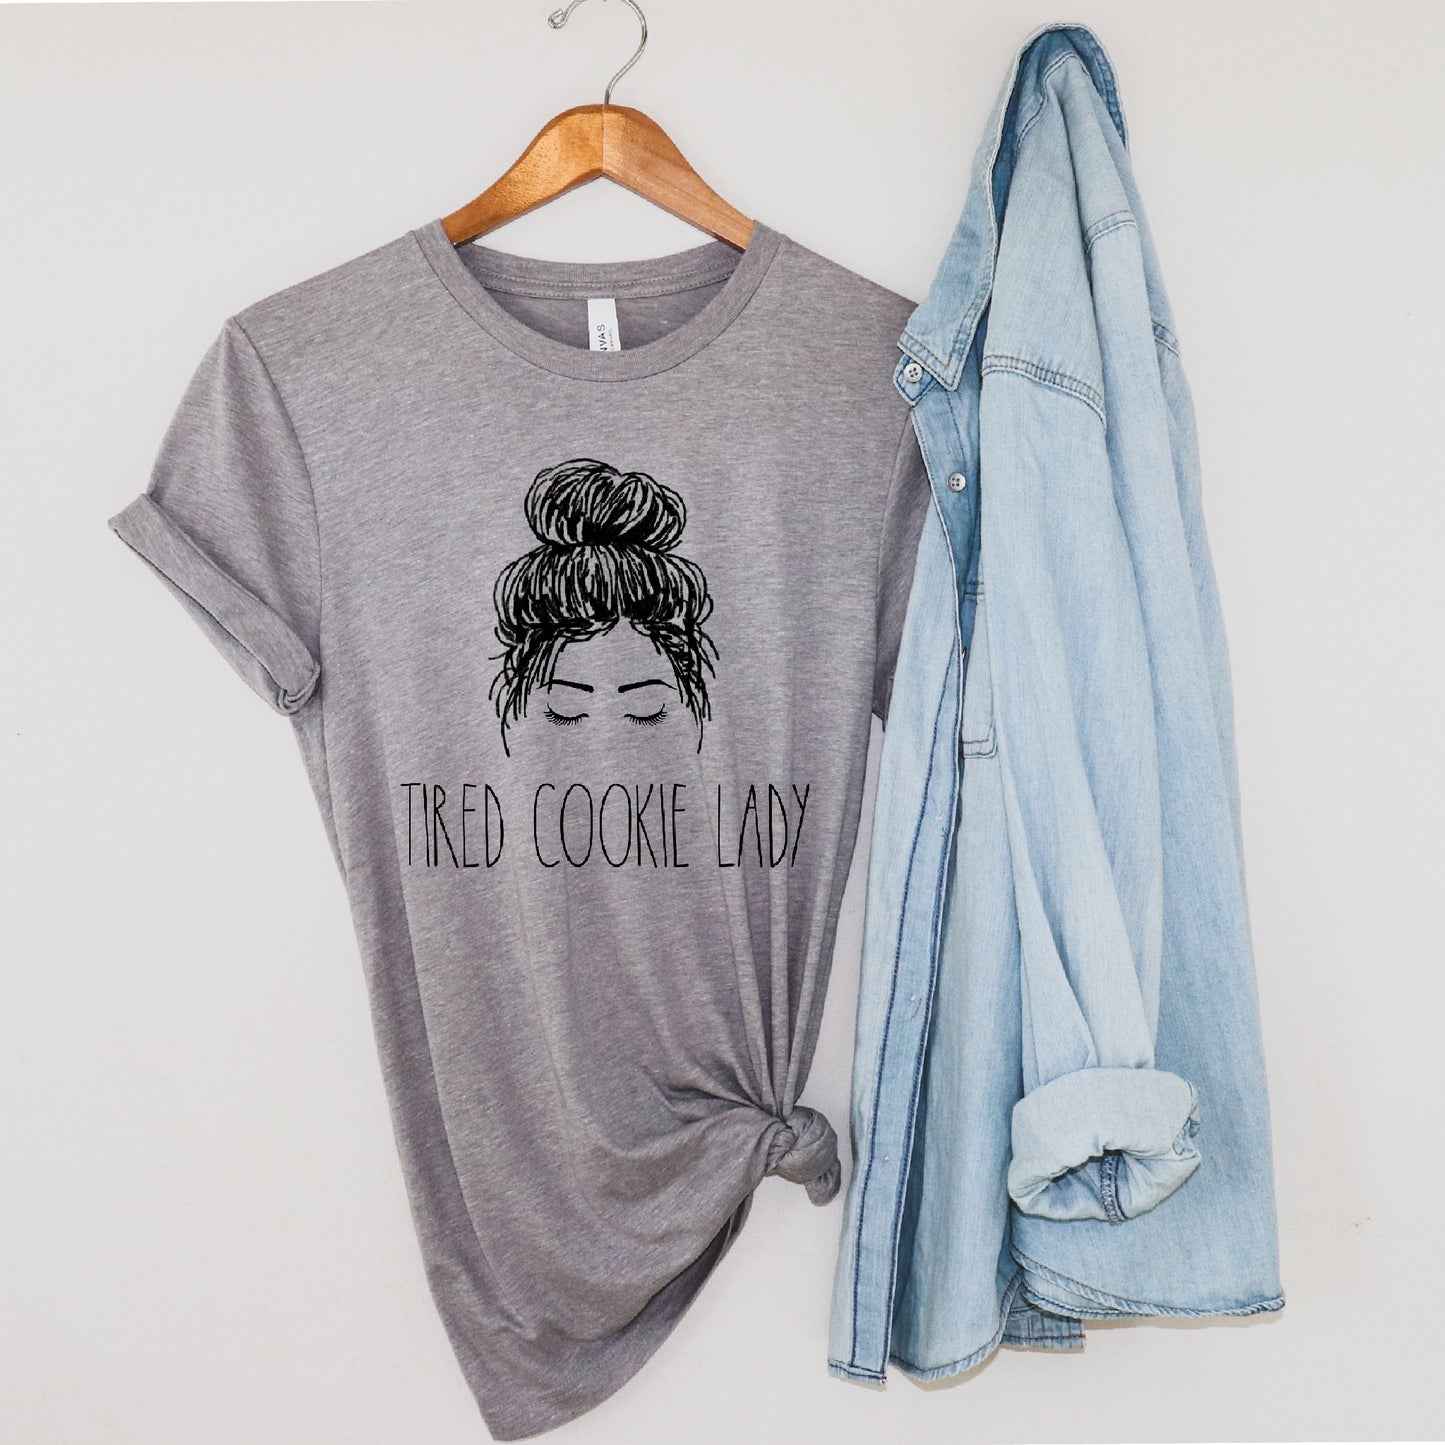 Tired Cookie Lady - Unisex Tee